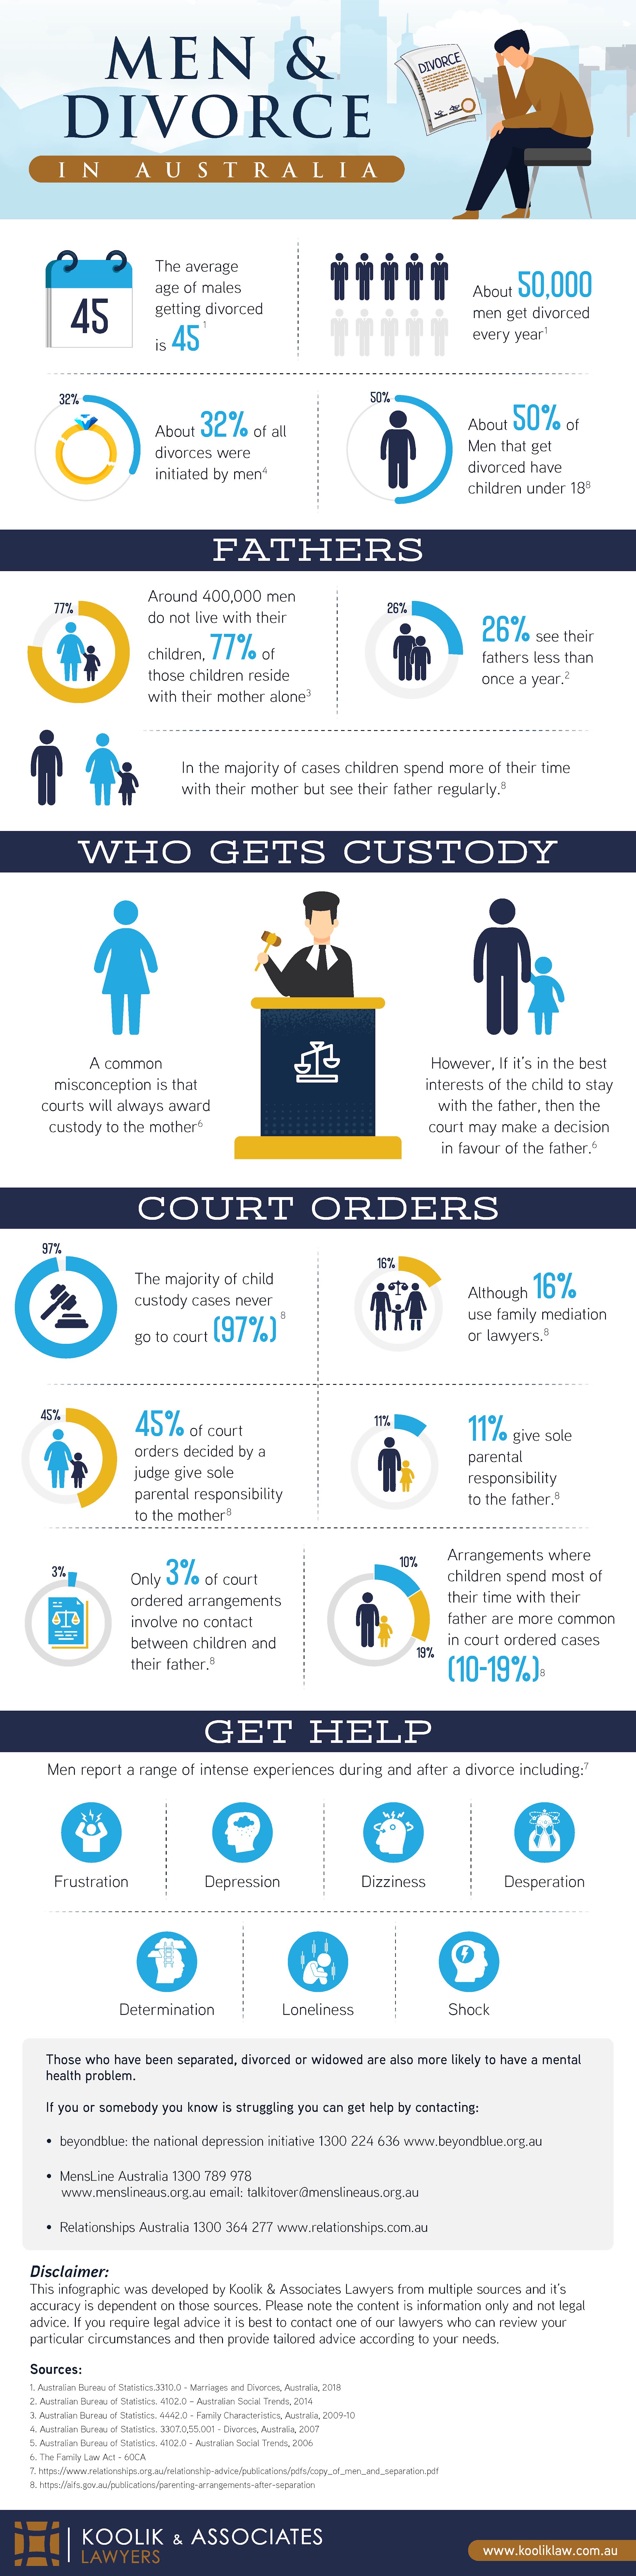 the-truth-about-men-and-divorce-in-australia-infographic